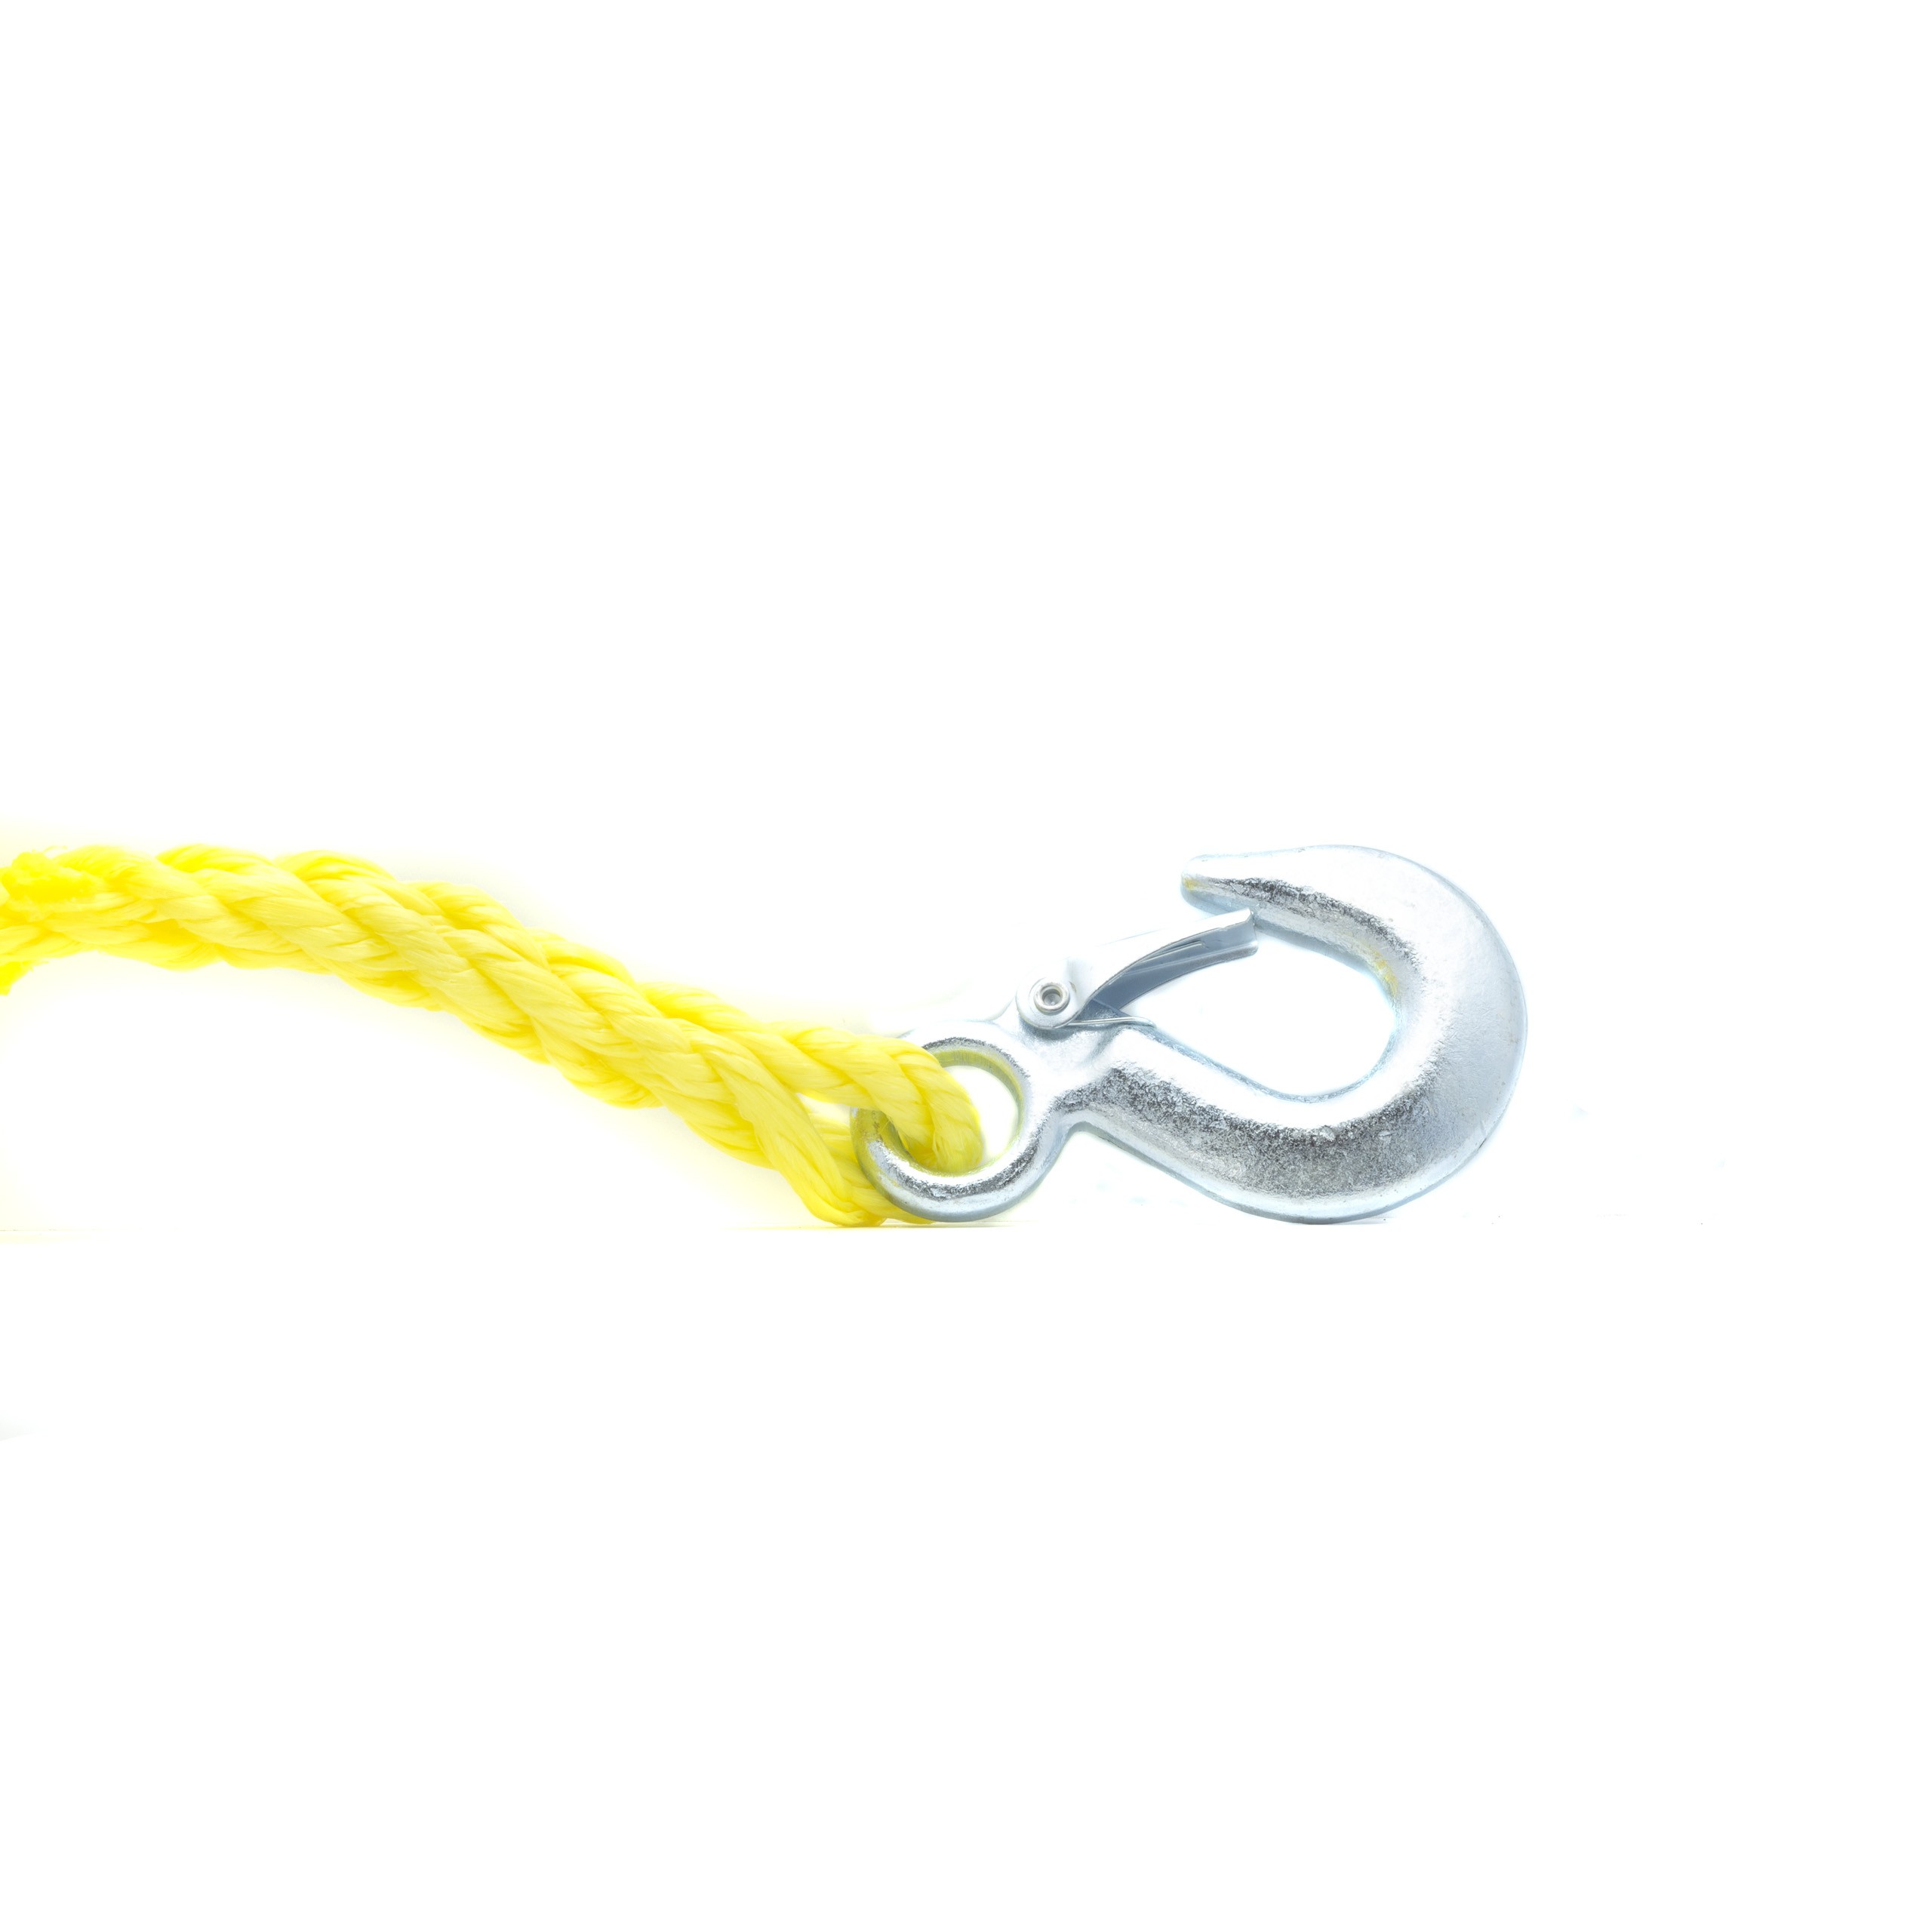 EPTR02 TOW ROPE 1450 KG